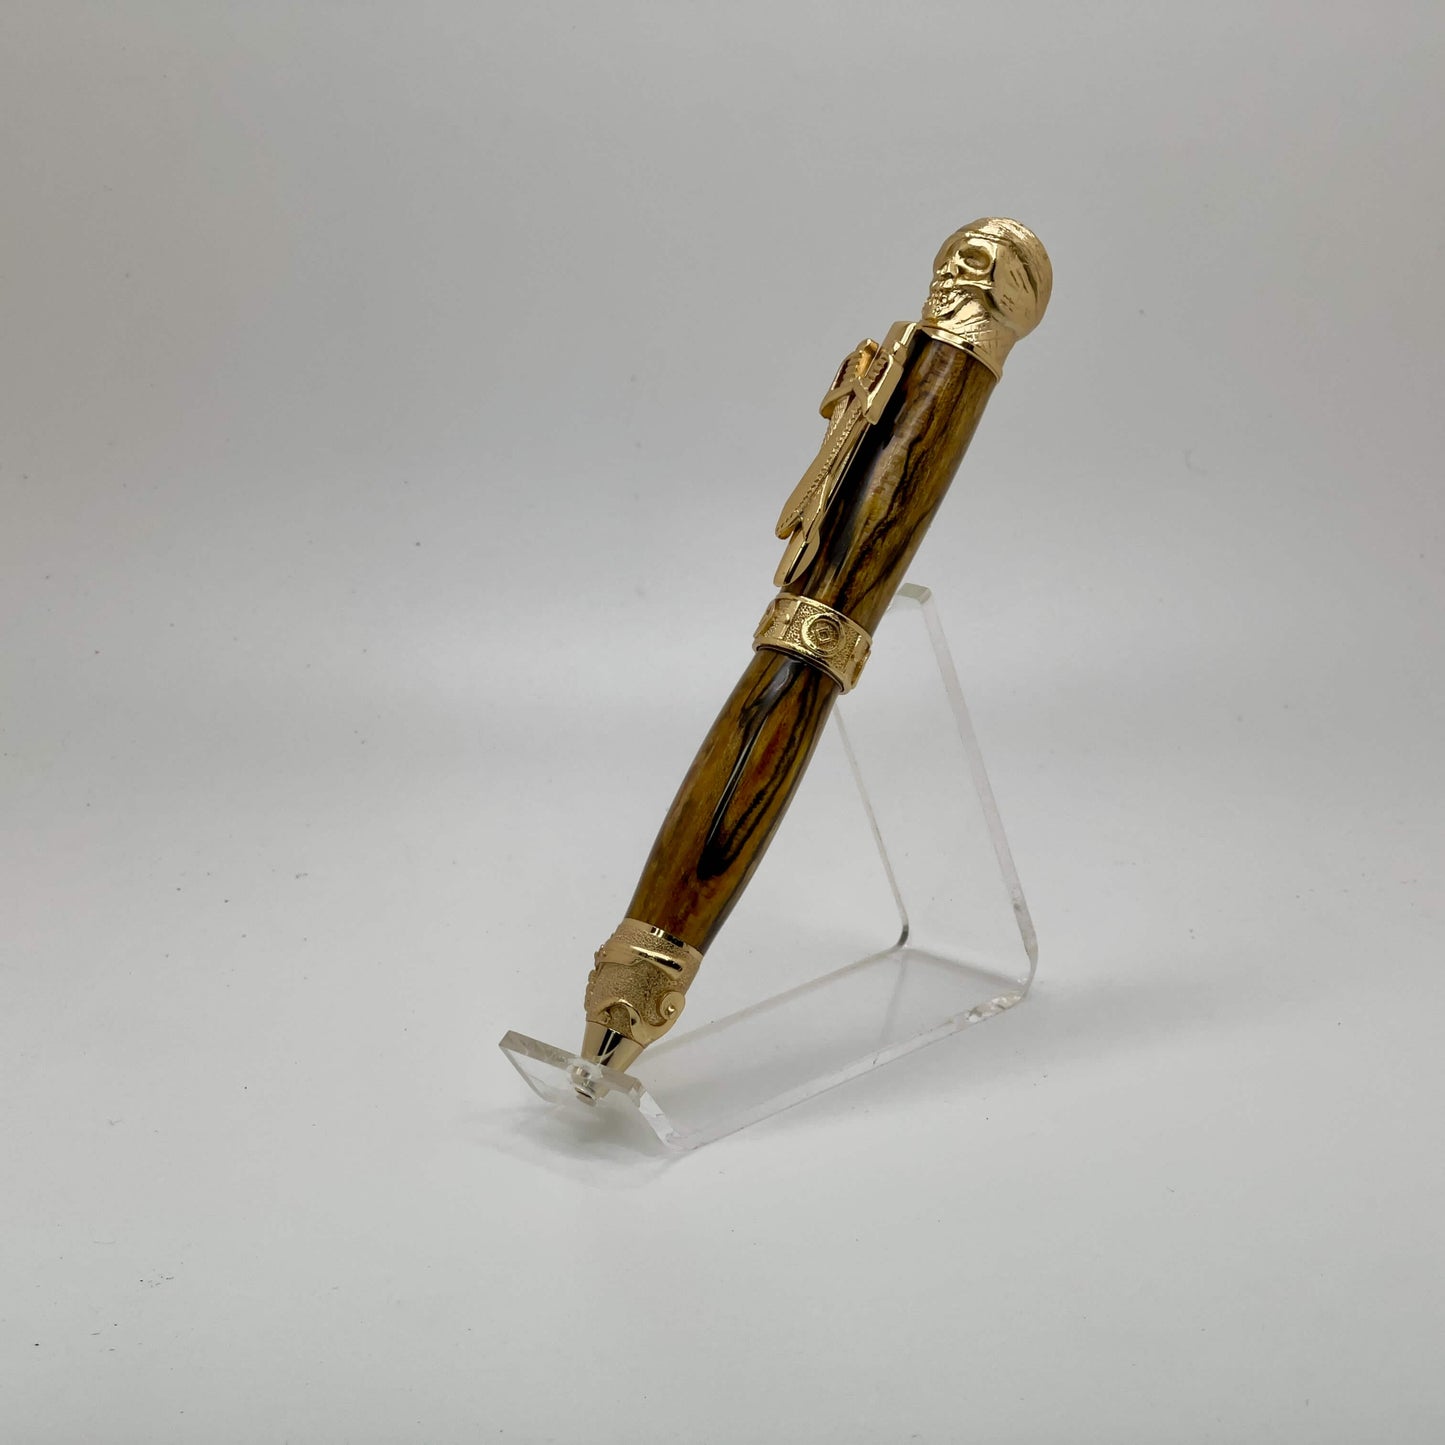 Pamlico Pirate Twist Pen In Gold- A Treasure for Swashbuckling Adventurers